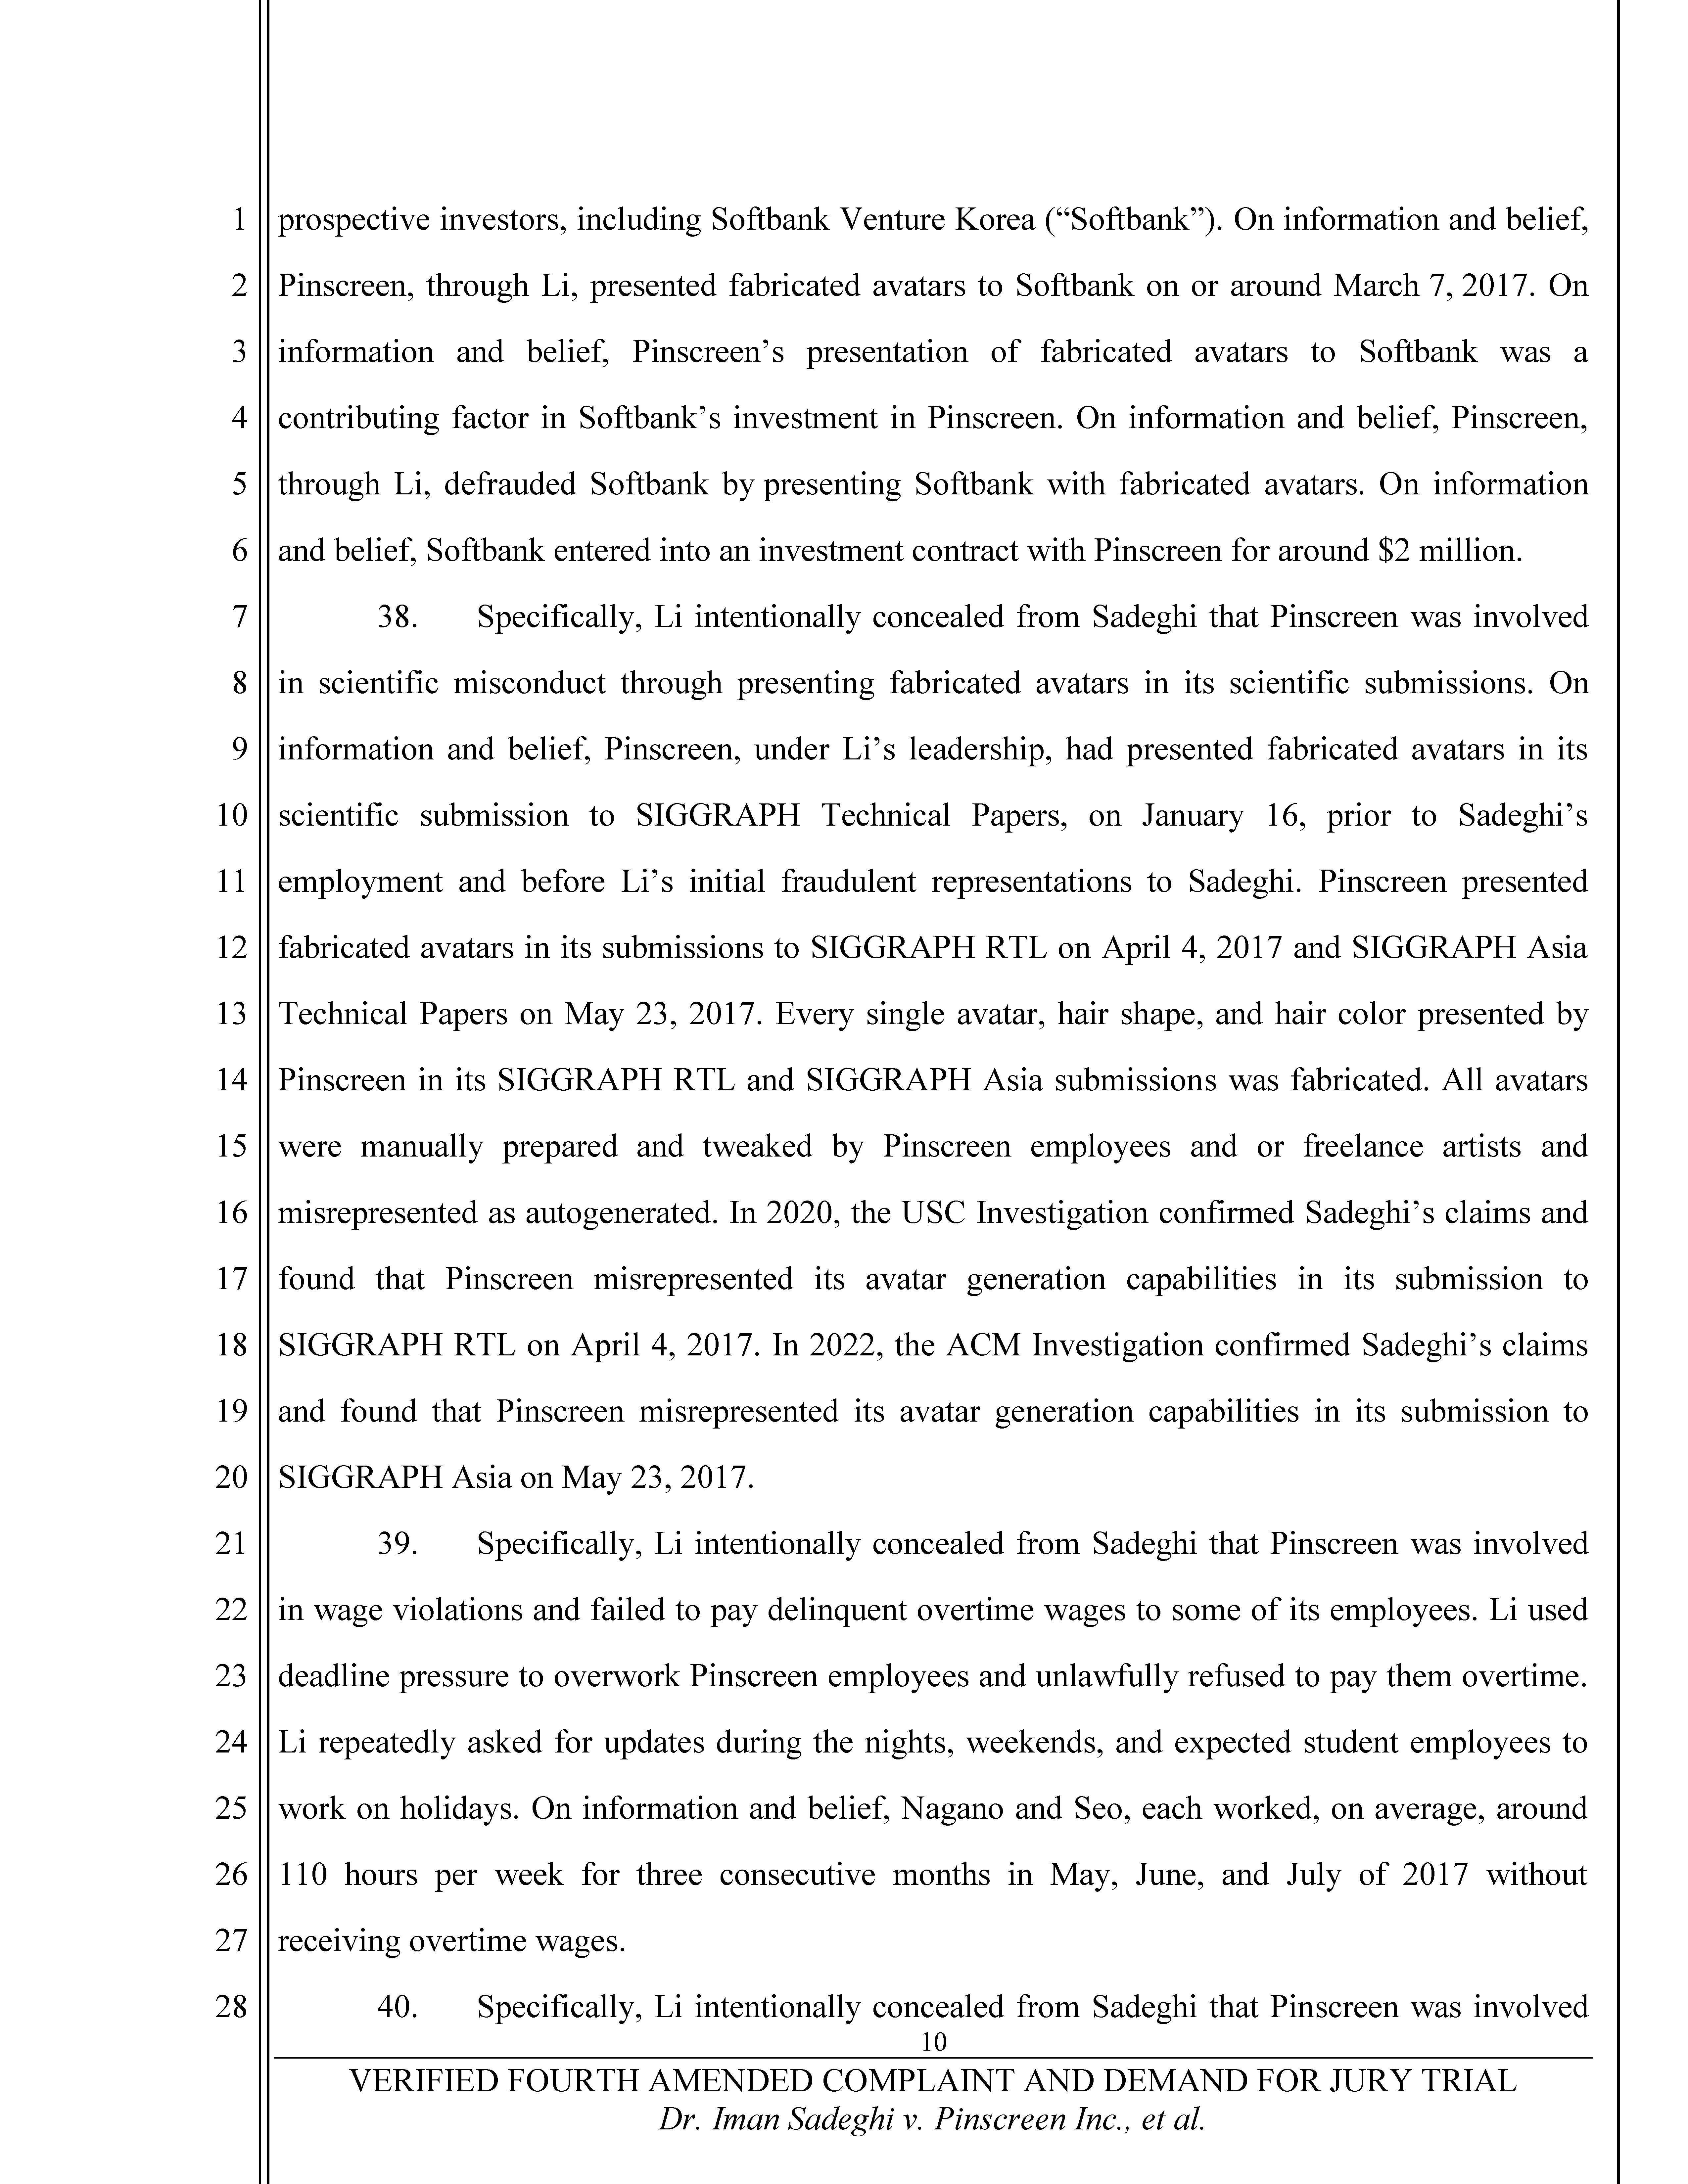 Fourth Amended Complaint (4AC) Page 11